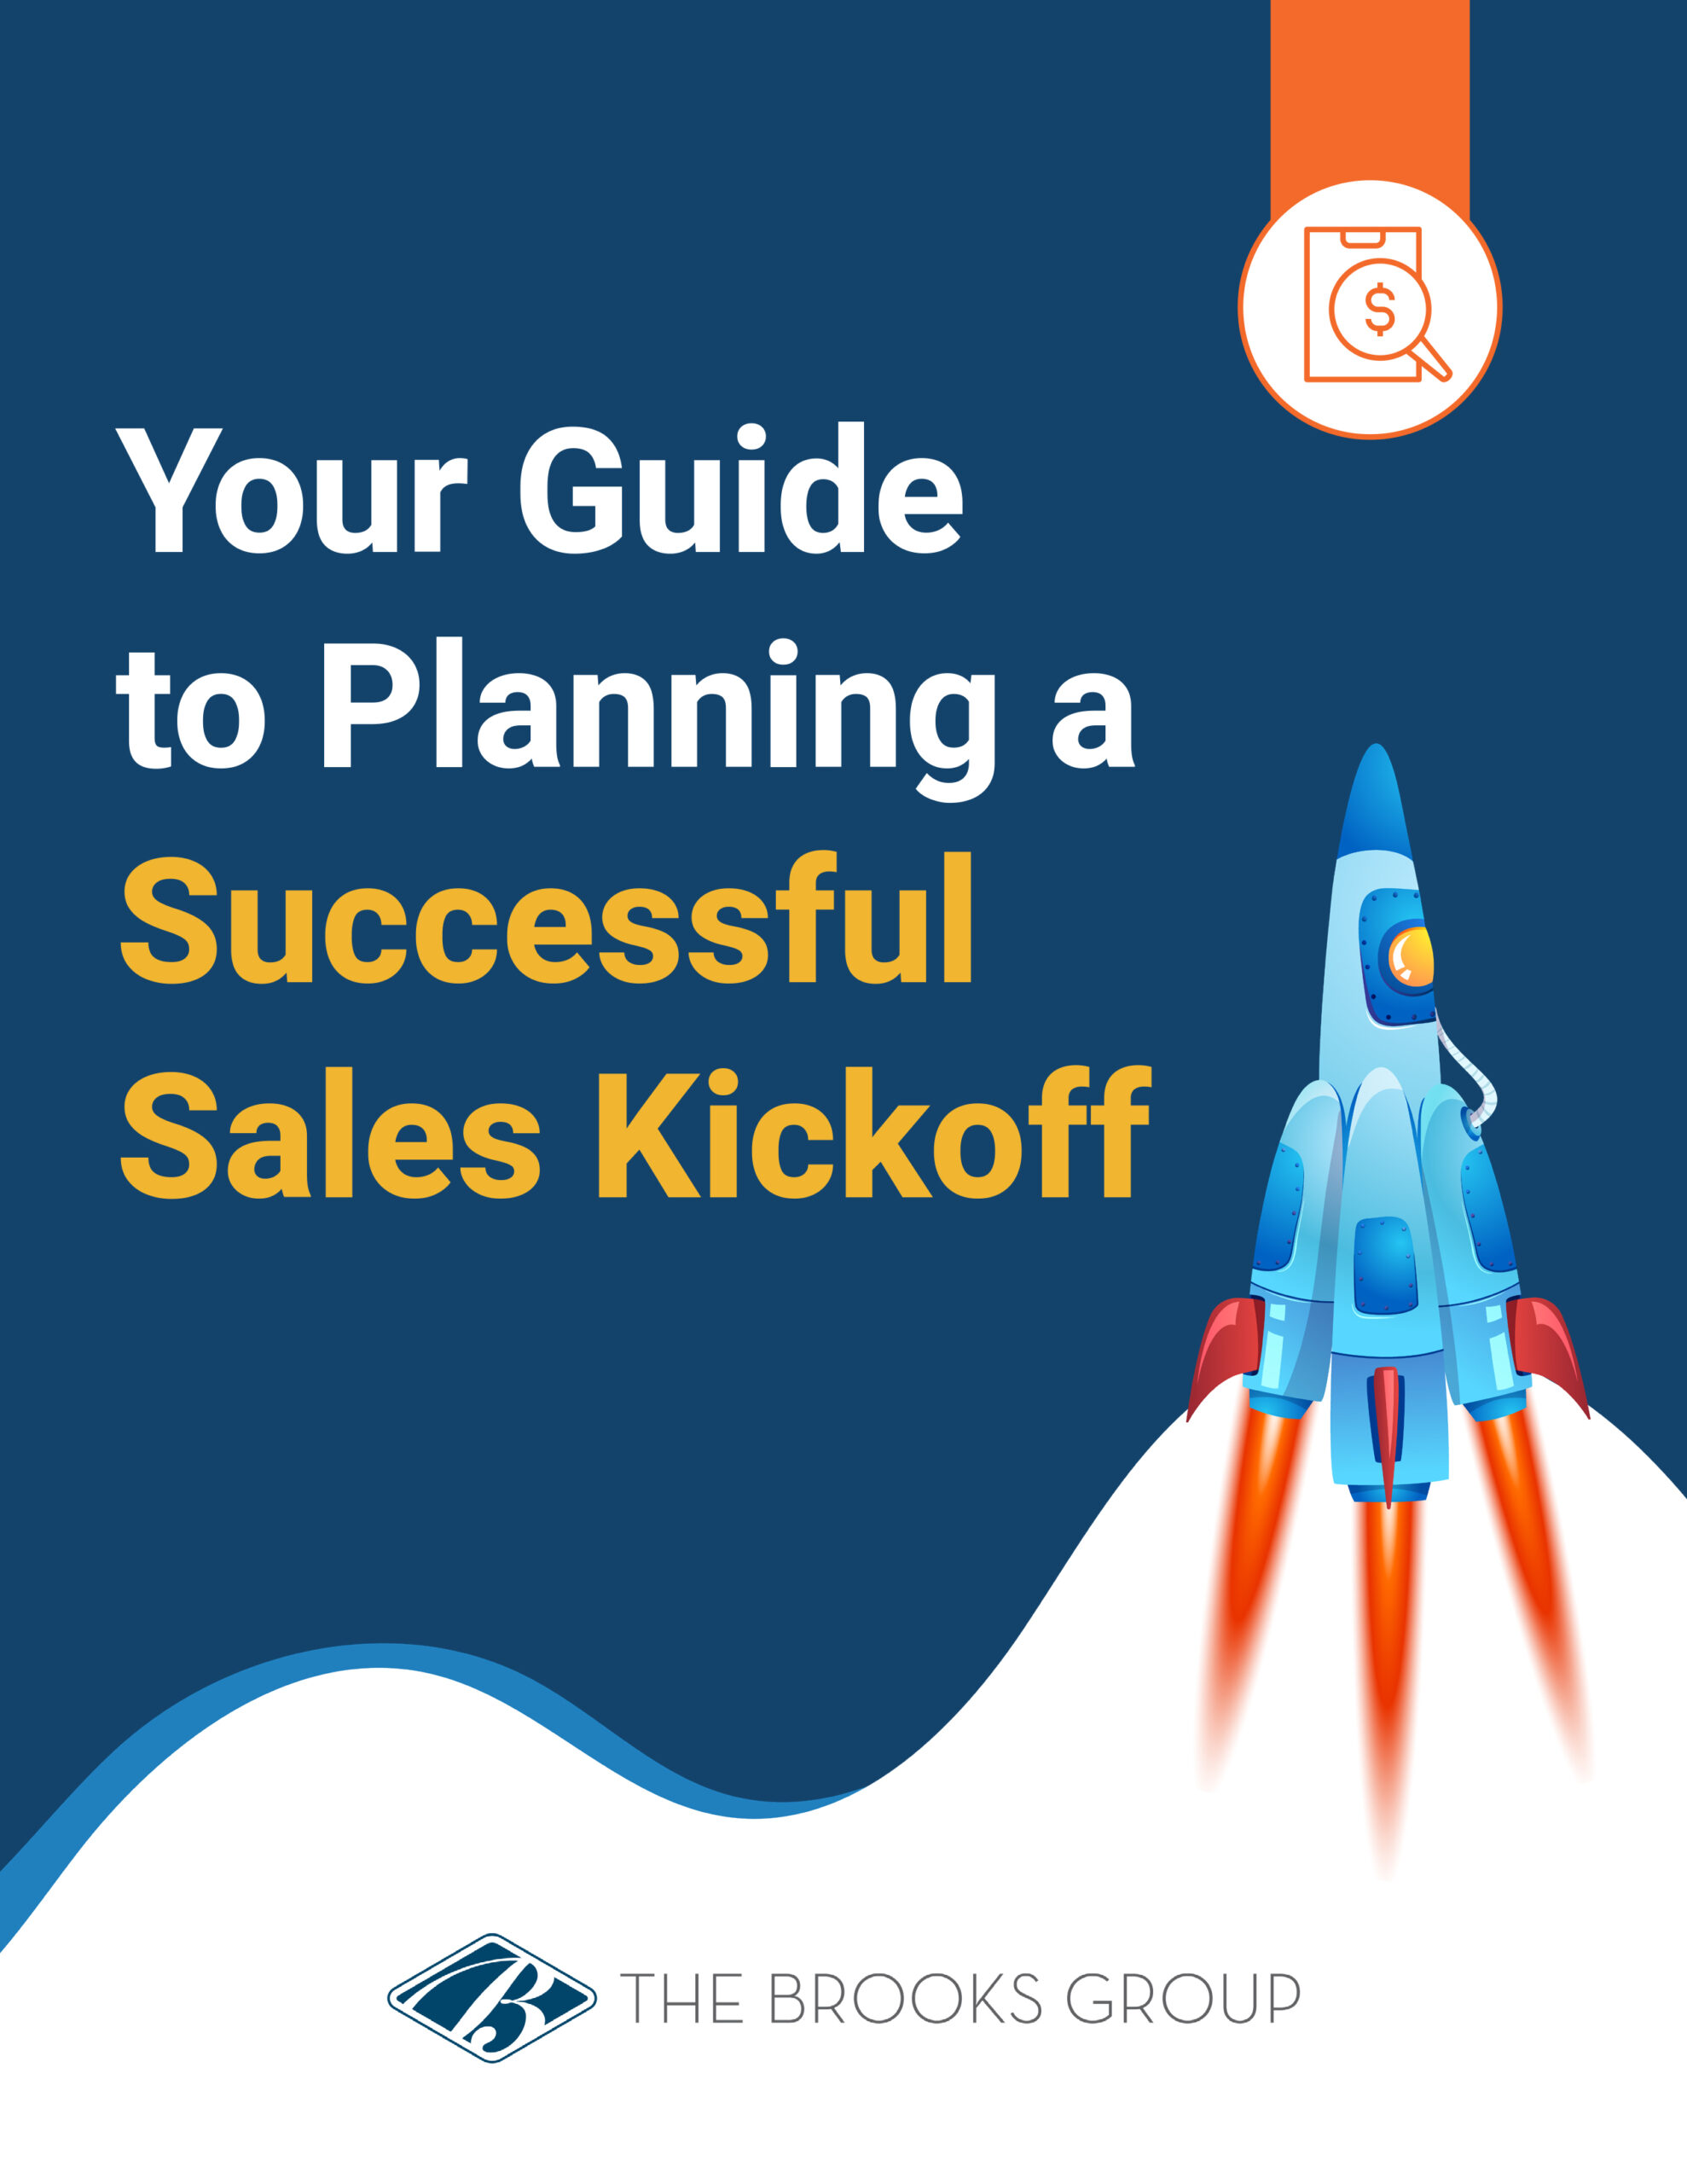 Your Guide to Planning a Successful Sales Kickoff